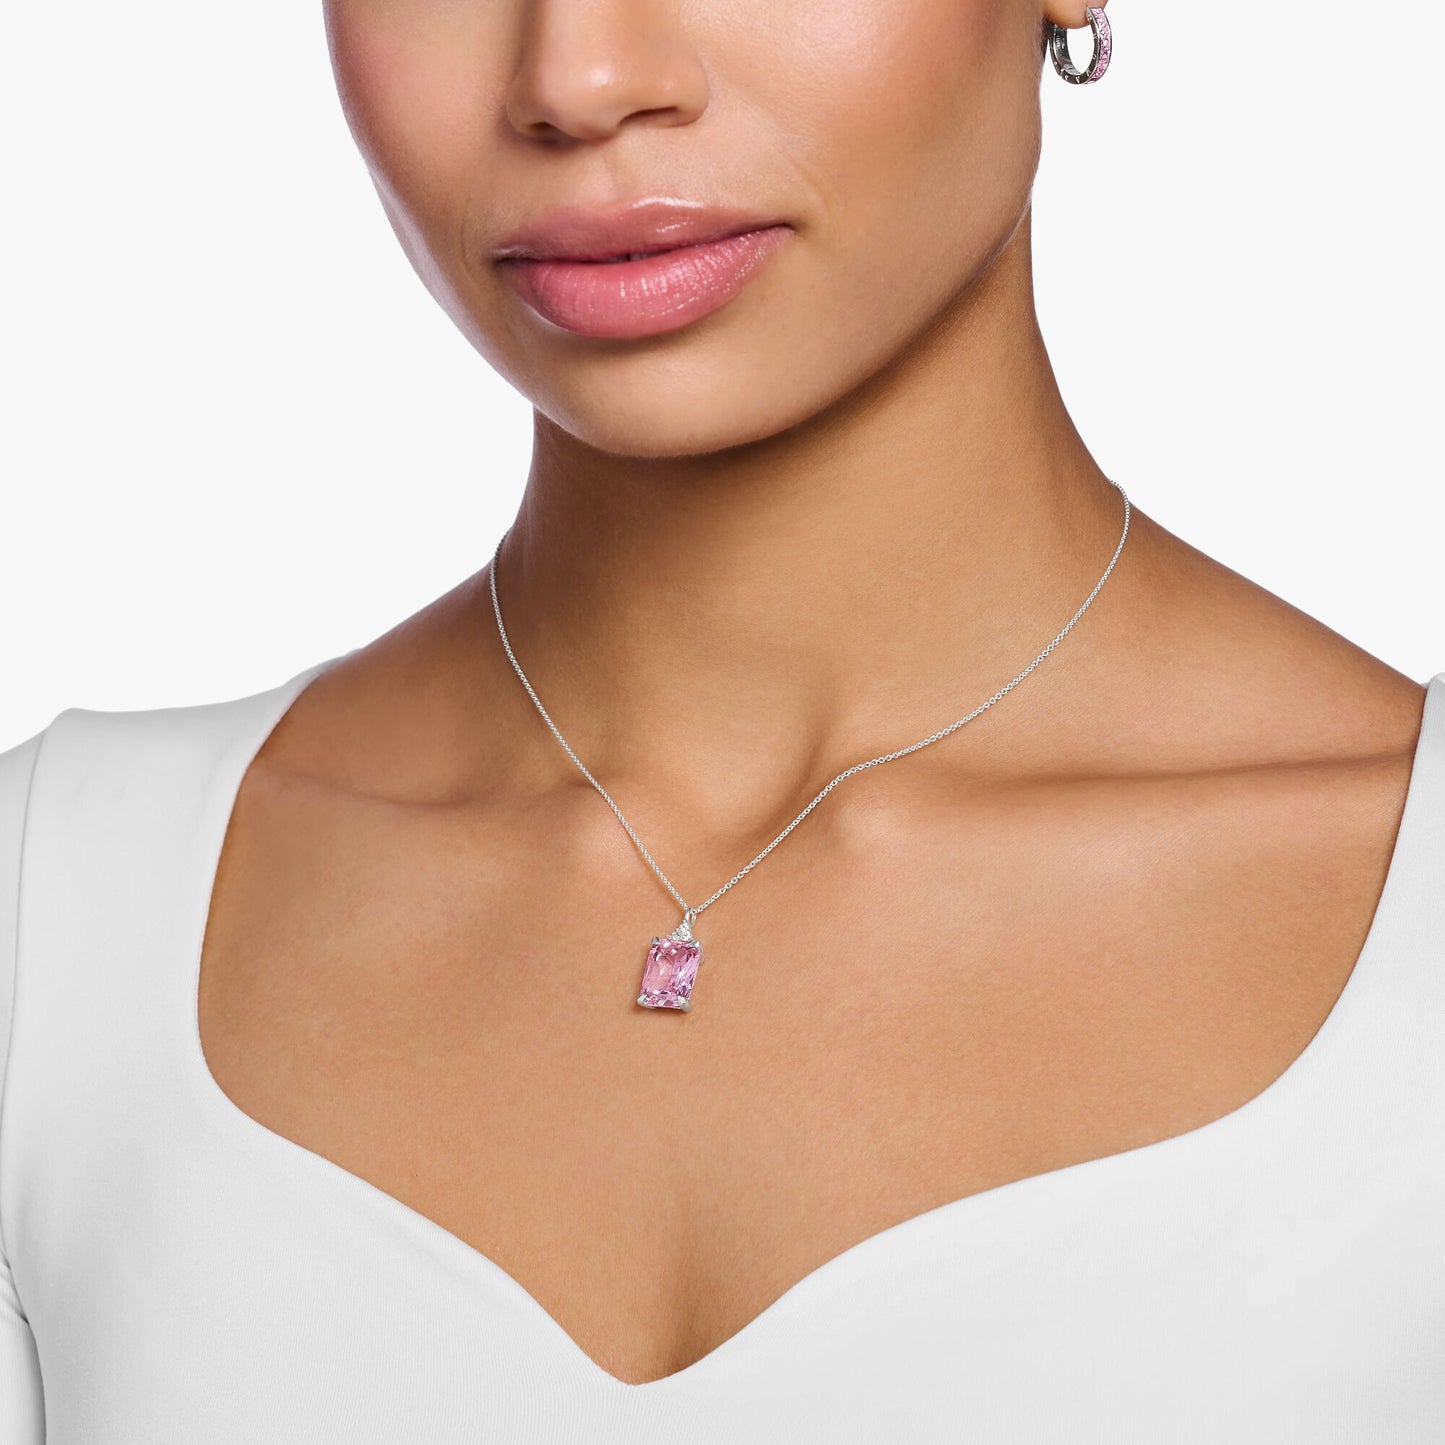 Thomas Sabo Necklace With Pink Stone Silver KE1964-051-9-L45